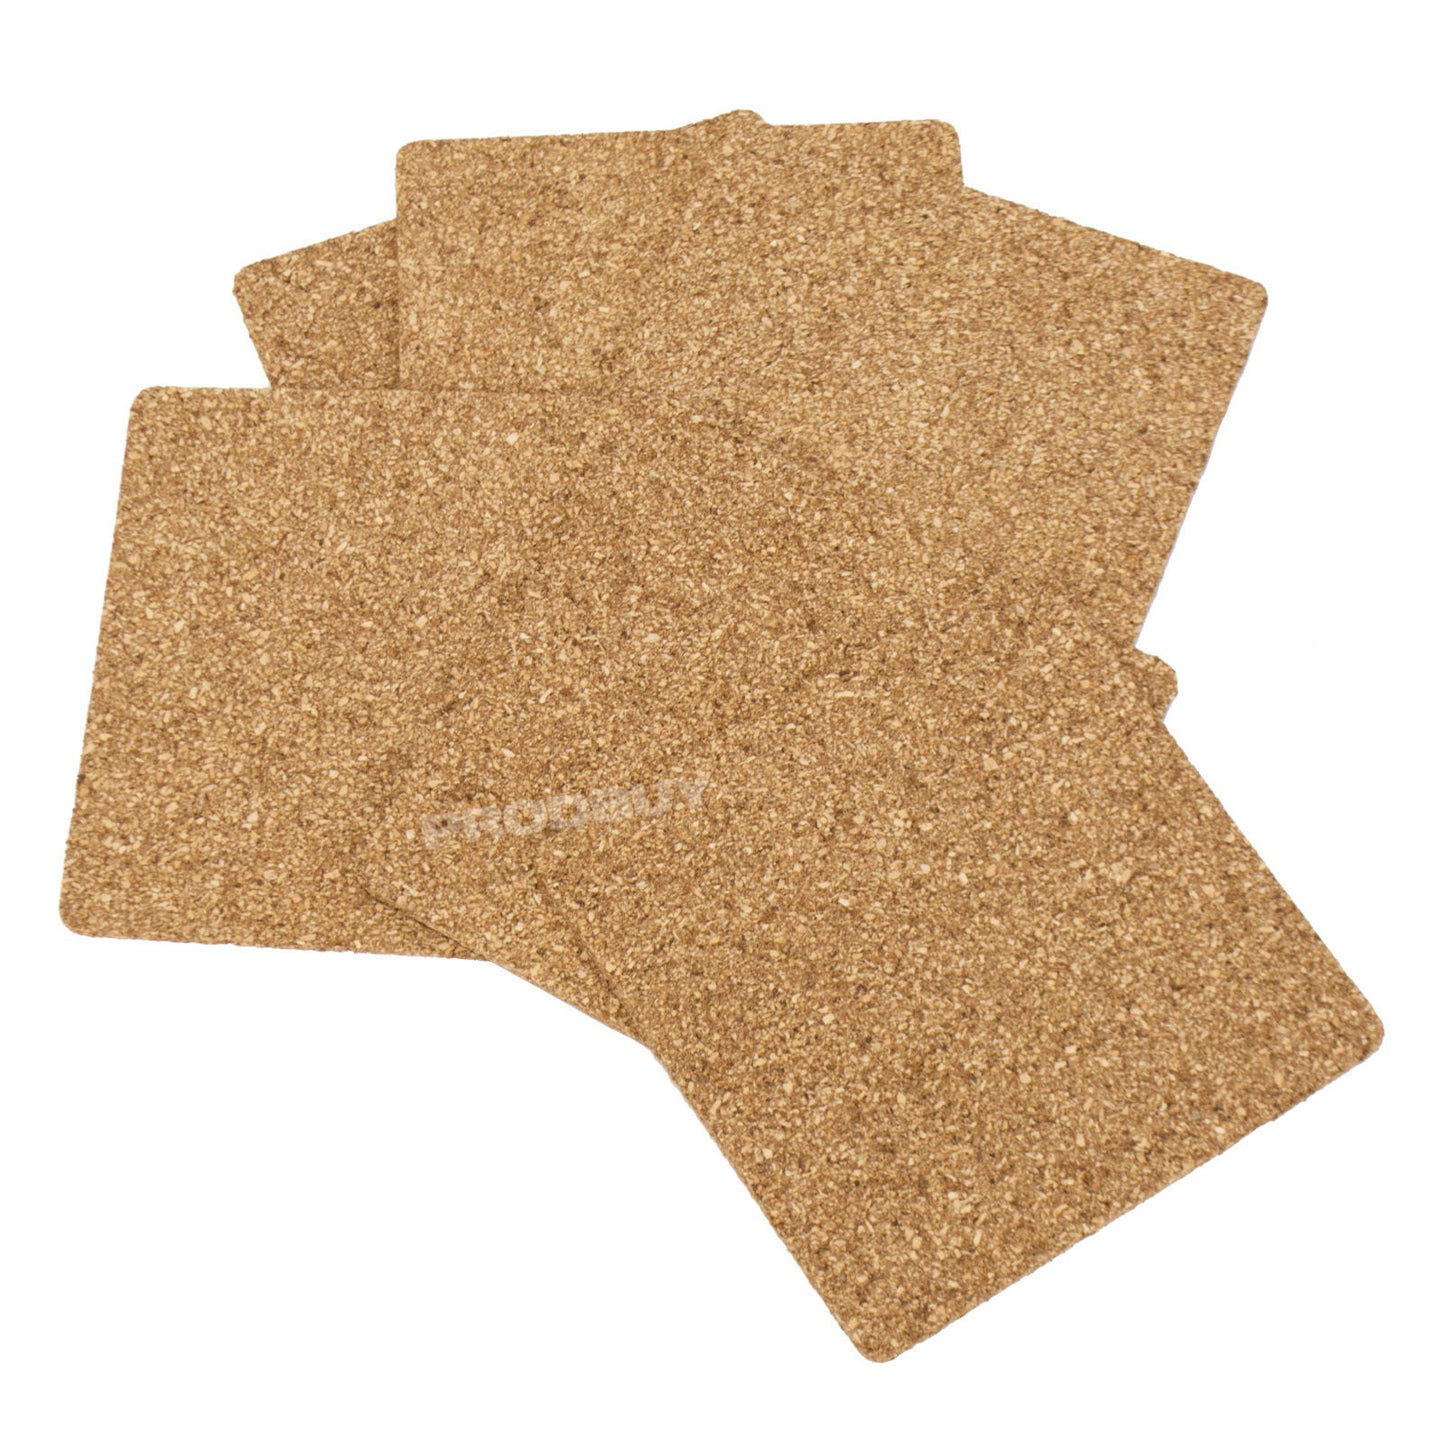 Pack of 24 Square Cork Drinks Coasters